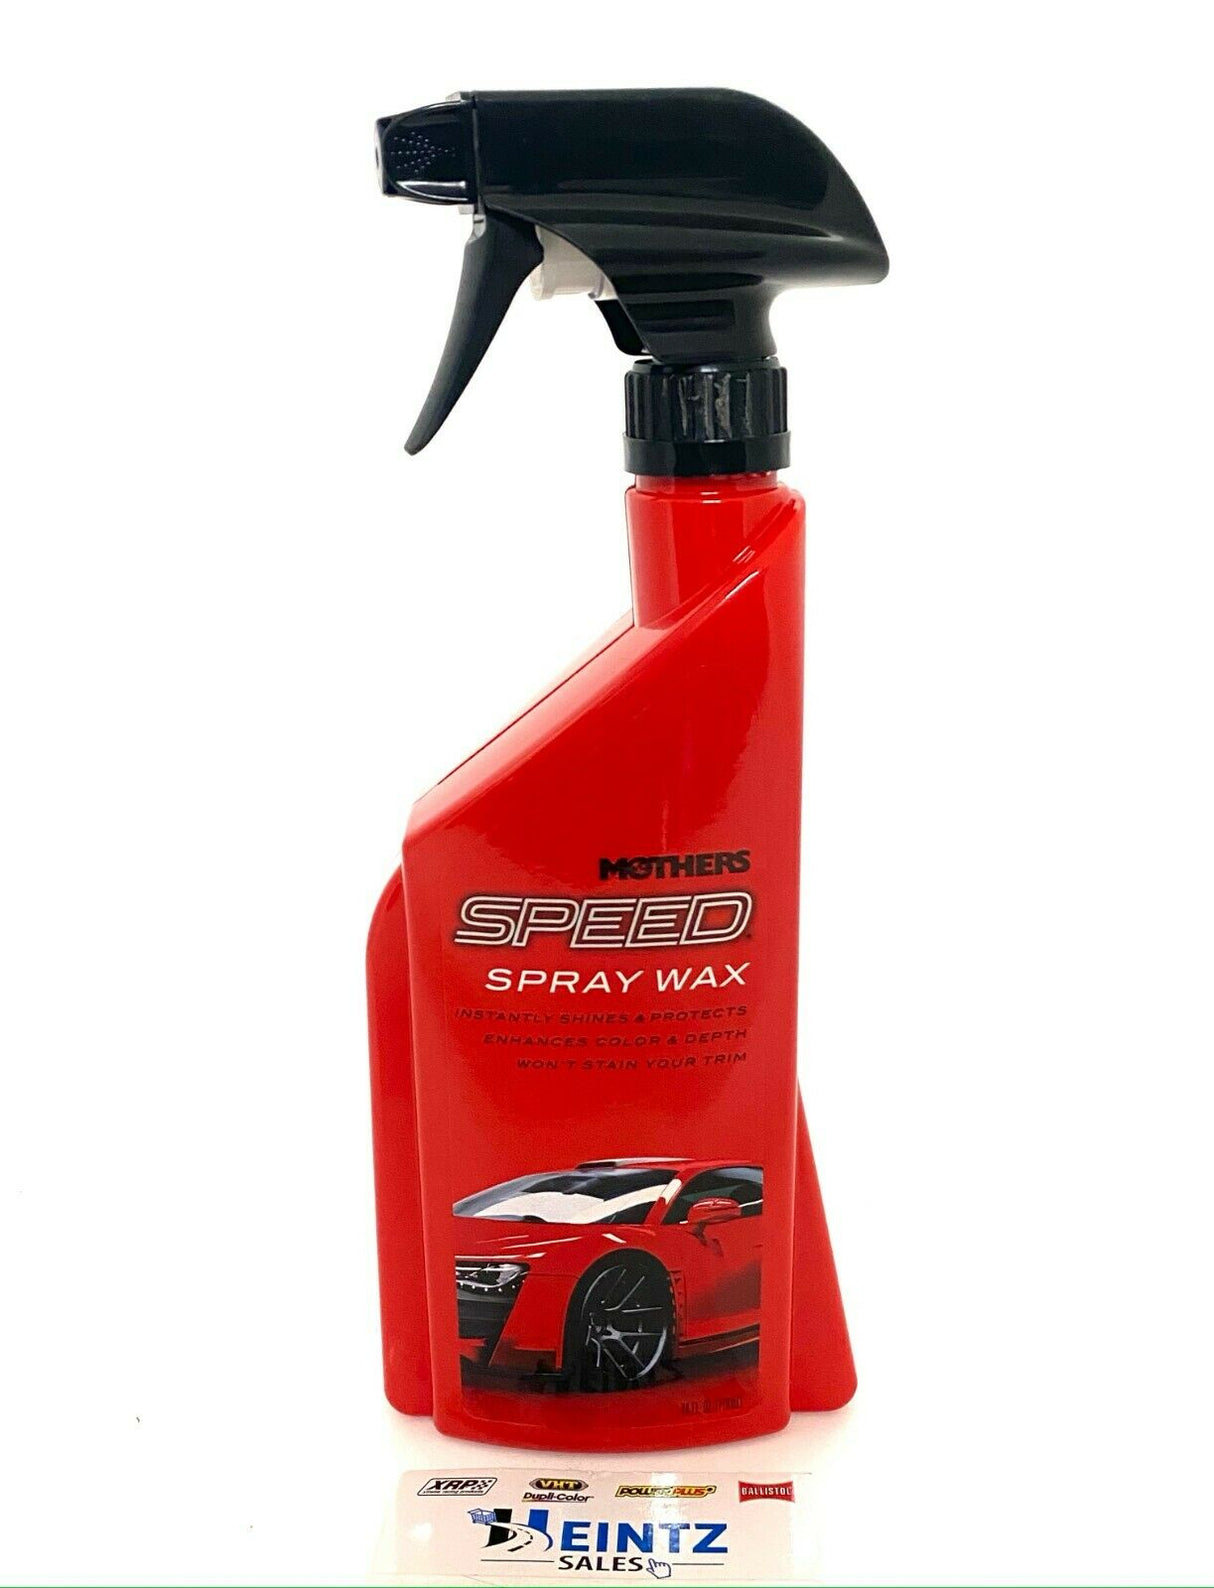 MOTHERS 15724 Speed Spray Wax - Shines & Protects - Color Enhancers - 24 fl. oz.